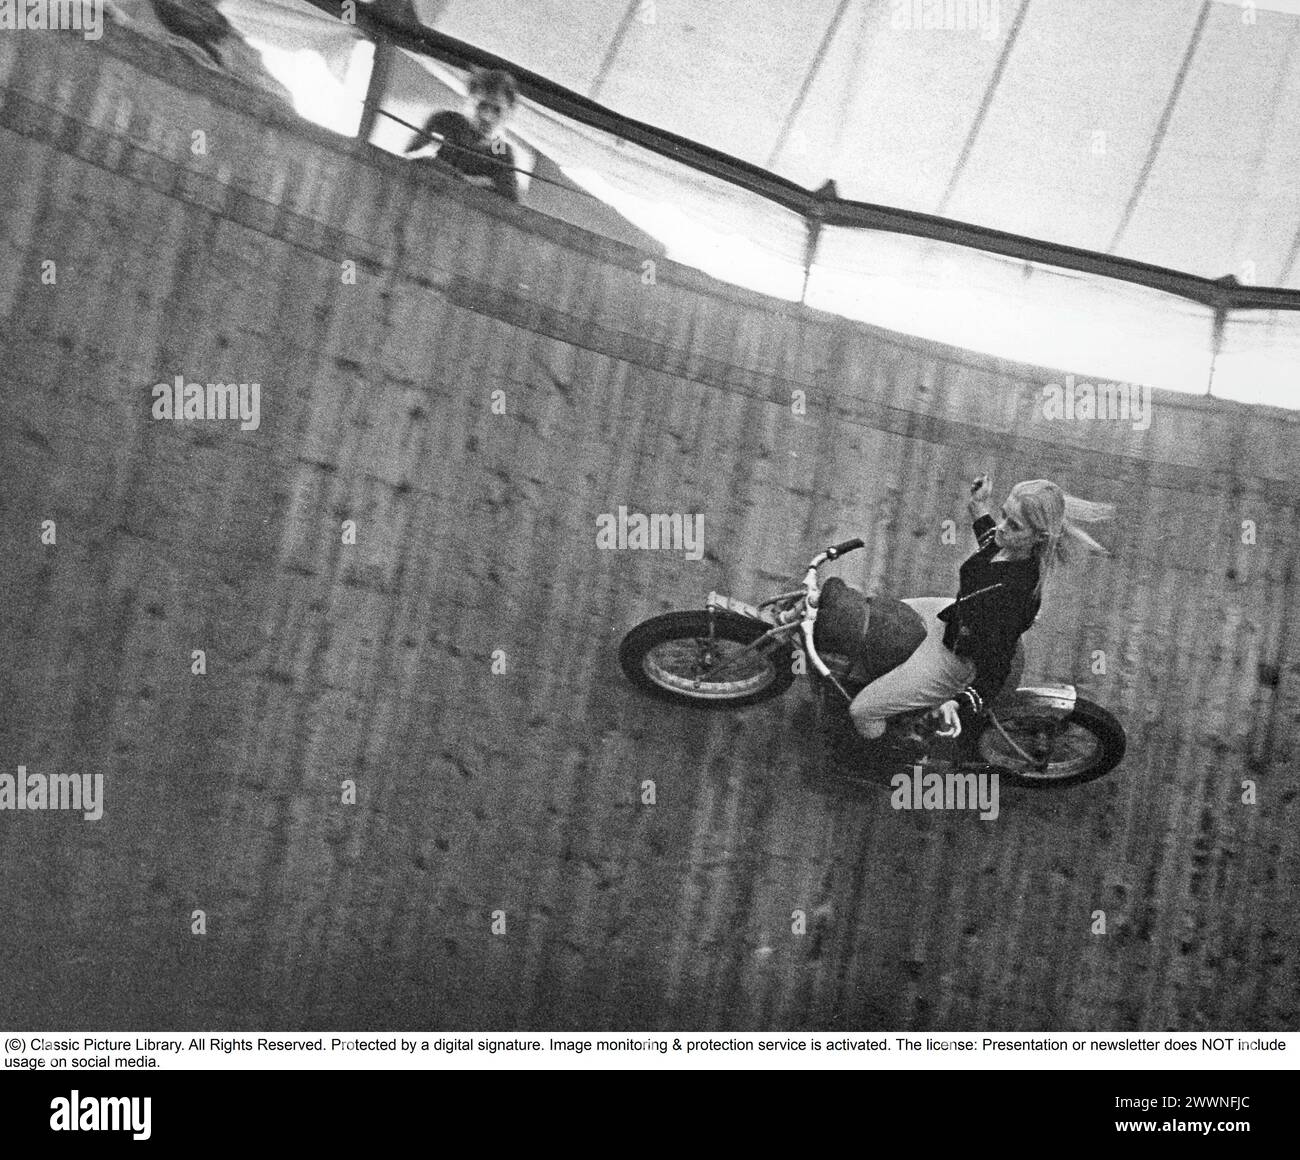 Wall of death 1967. The wall of death, motordrome, velodrome or well of death is a carnival sideshow featuring a silo- or barrel-shaped wooden cylinder, typically ranging from 20 to 36 feet (6.1 to 11.0 m) in diameter and made of wooden planks, inside which motorcyclists travel along the vertical wall and perform stunts, held in place by friction and centrifugal force. The original wall of death was in 1911 on Coney Island in the United States. Pictured a motorcyclist in high speed in the velodrome, showing off, with his hands in the air, not on the handlebars as he should.  Pictured Elisabeth Stock Photo